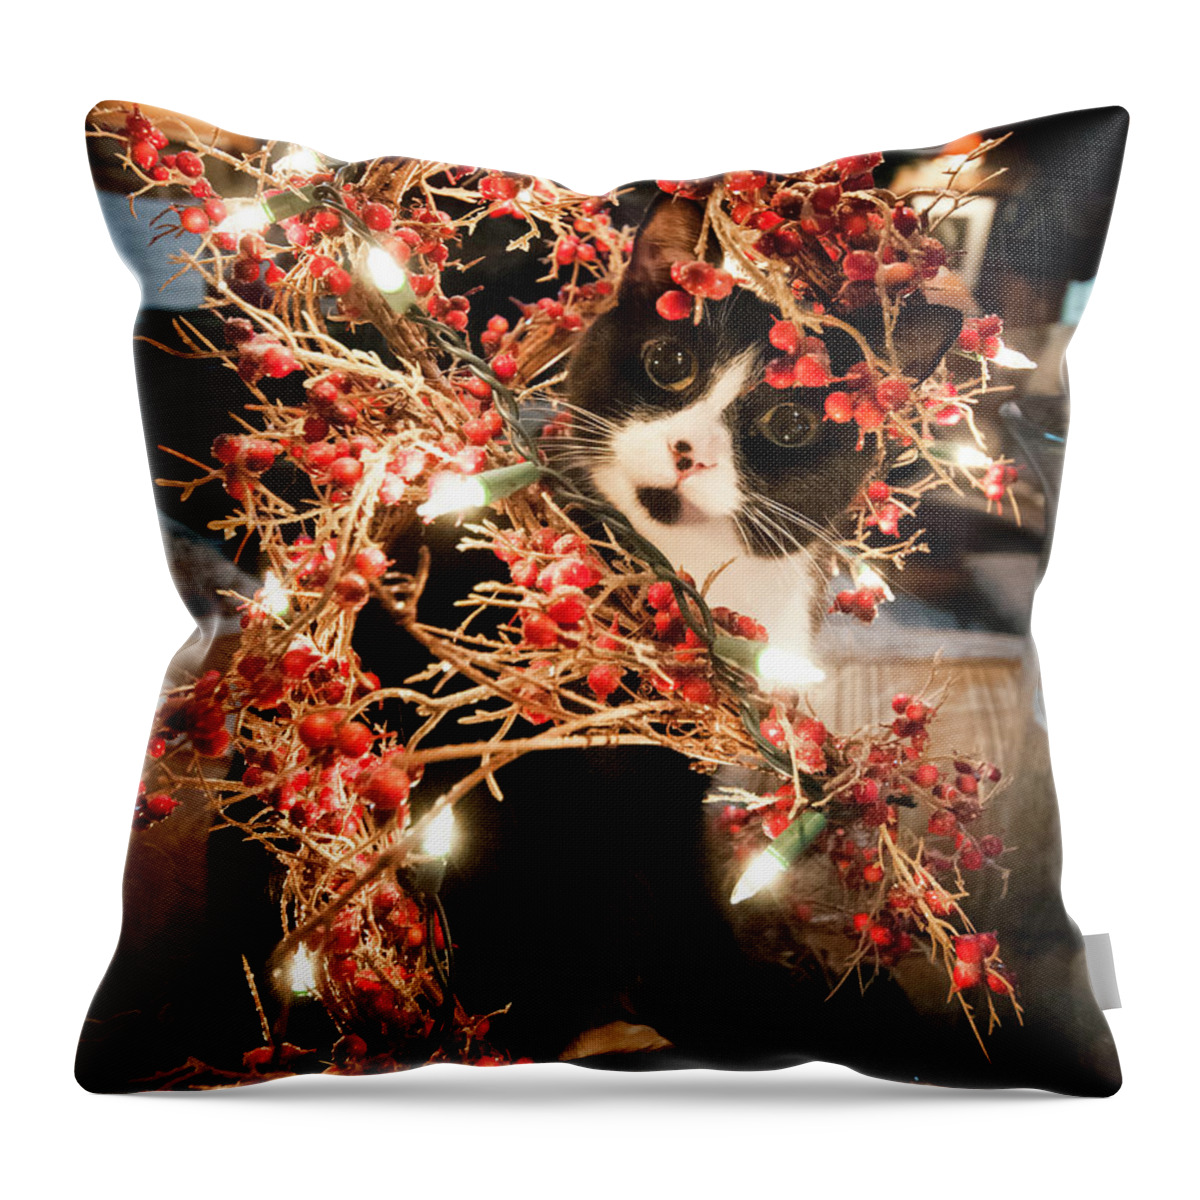 Christmas Throw Pillow featuring the photograph The Munch Christmas by Terry Kirkland Cook